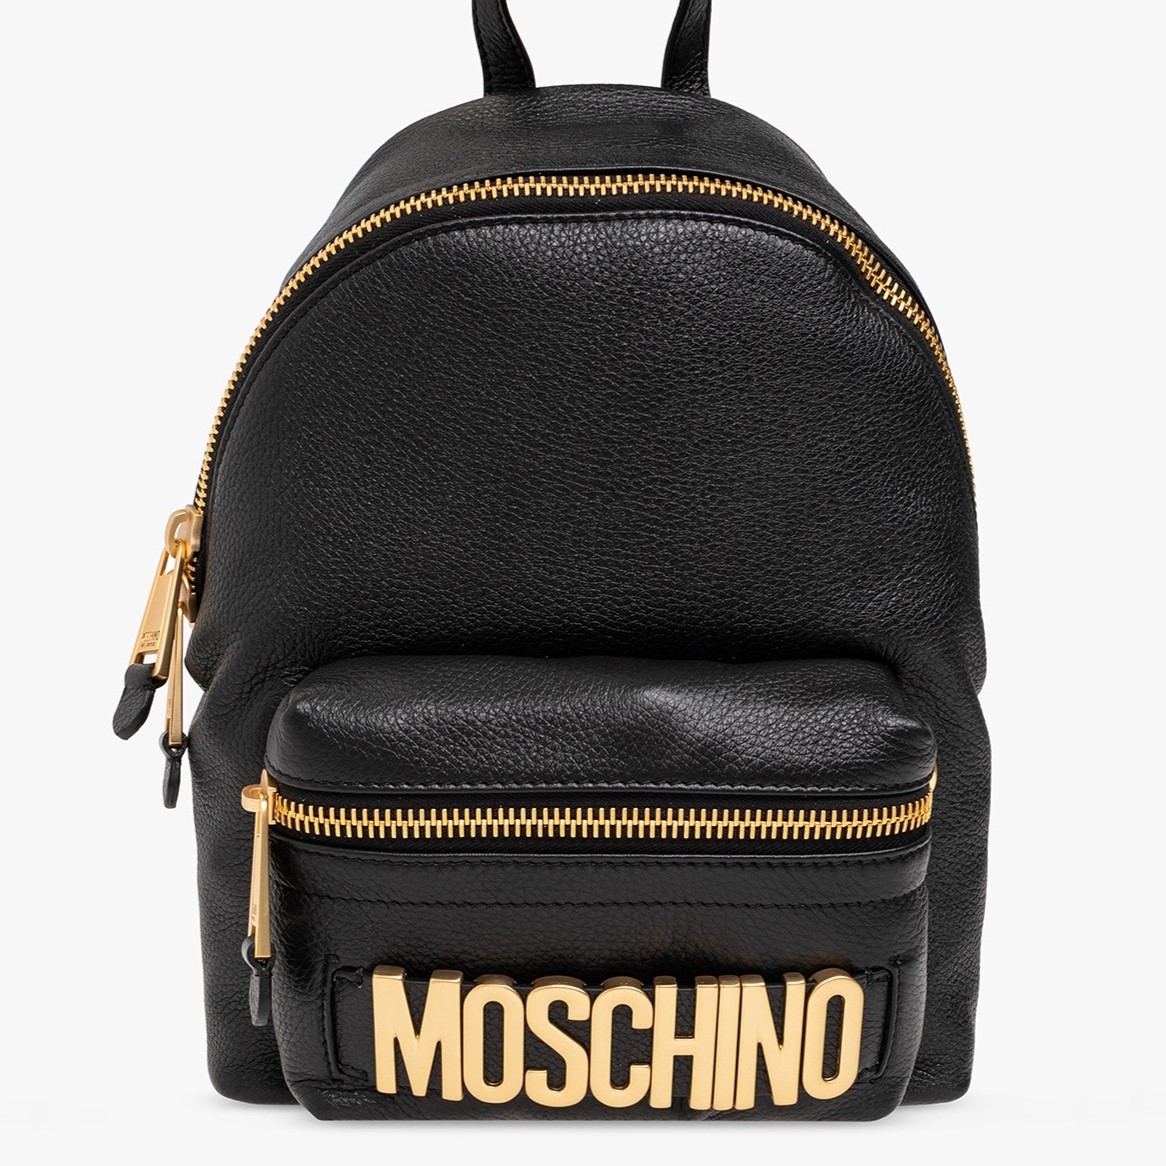 BALO NỮ MOSCHINO BLACK LEATHER BACKPACK WITH LOGO 2